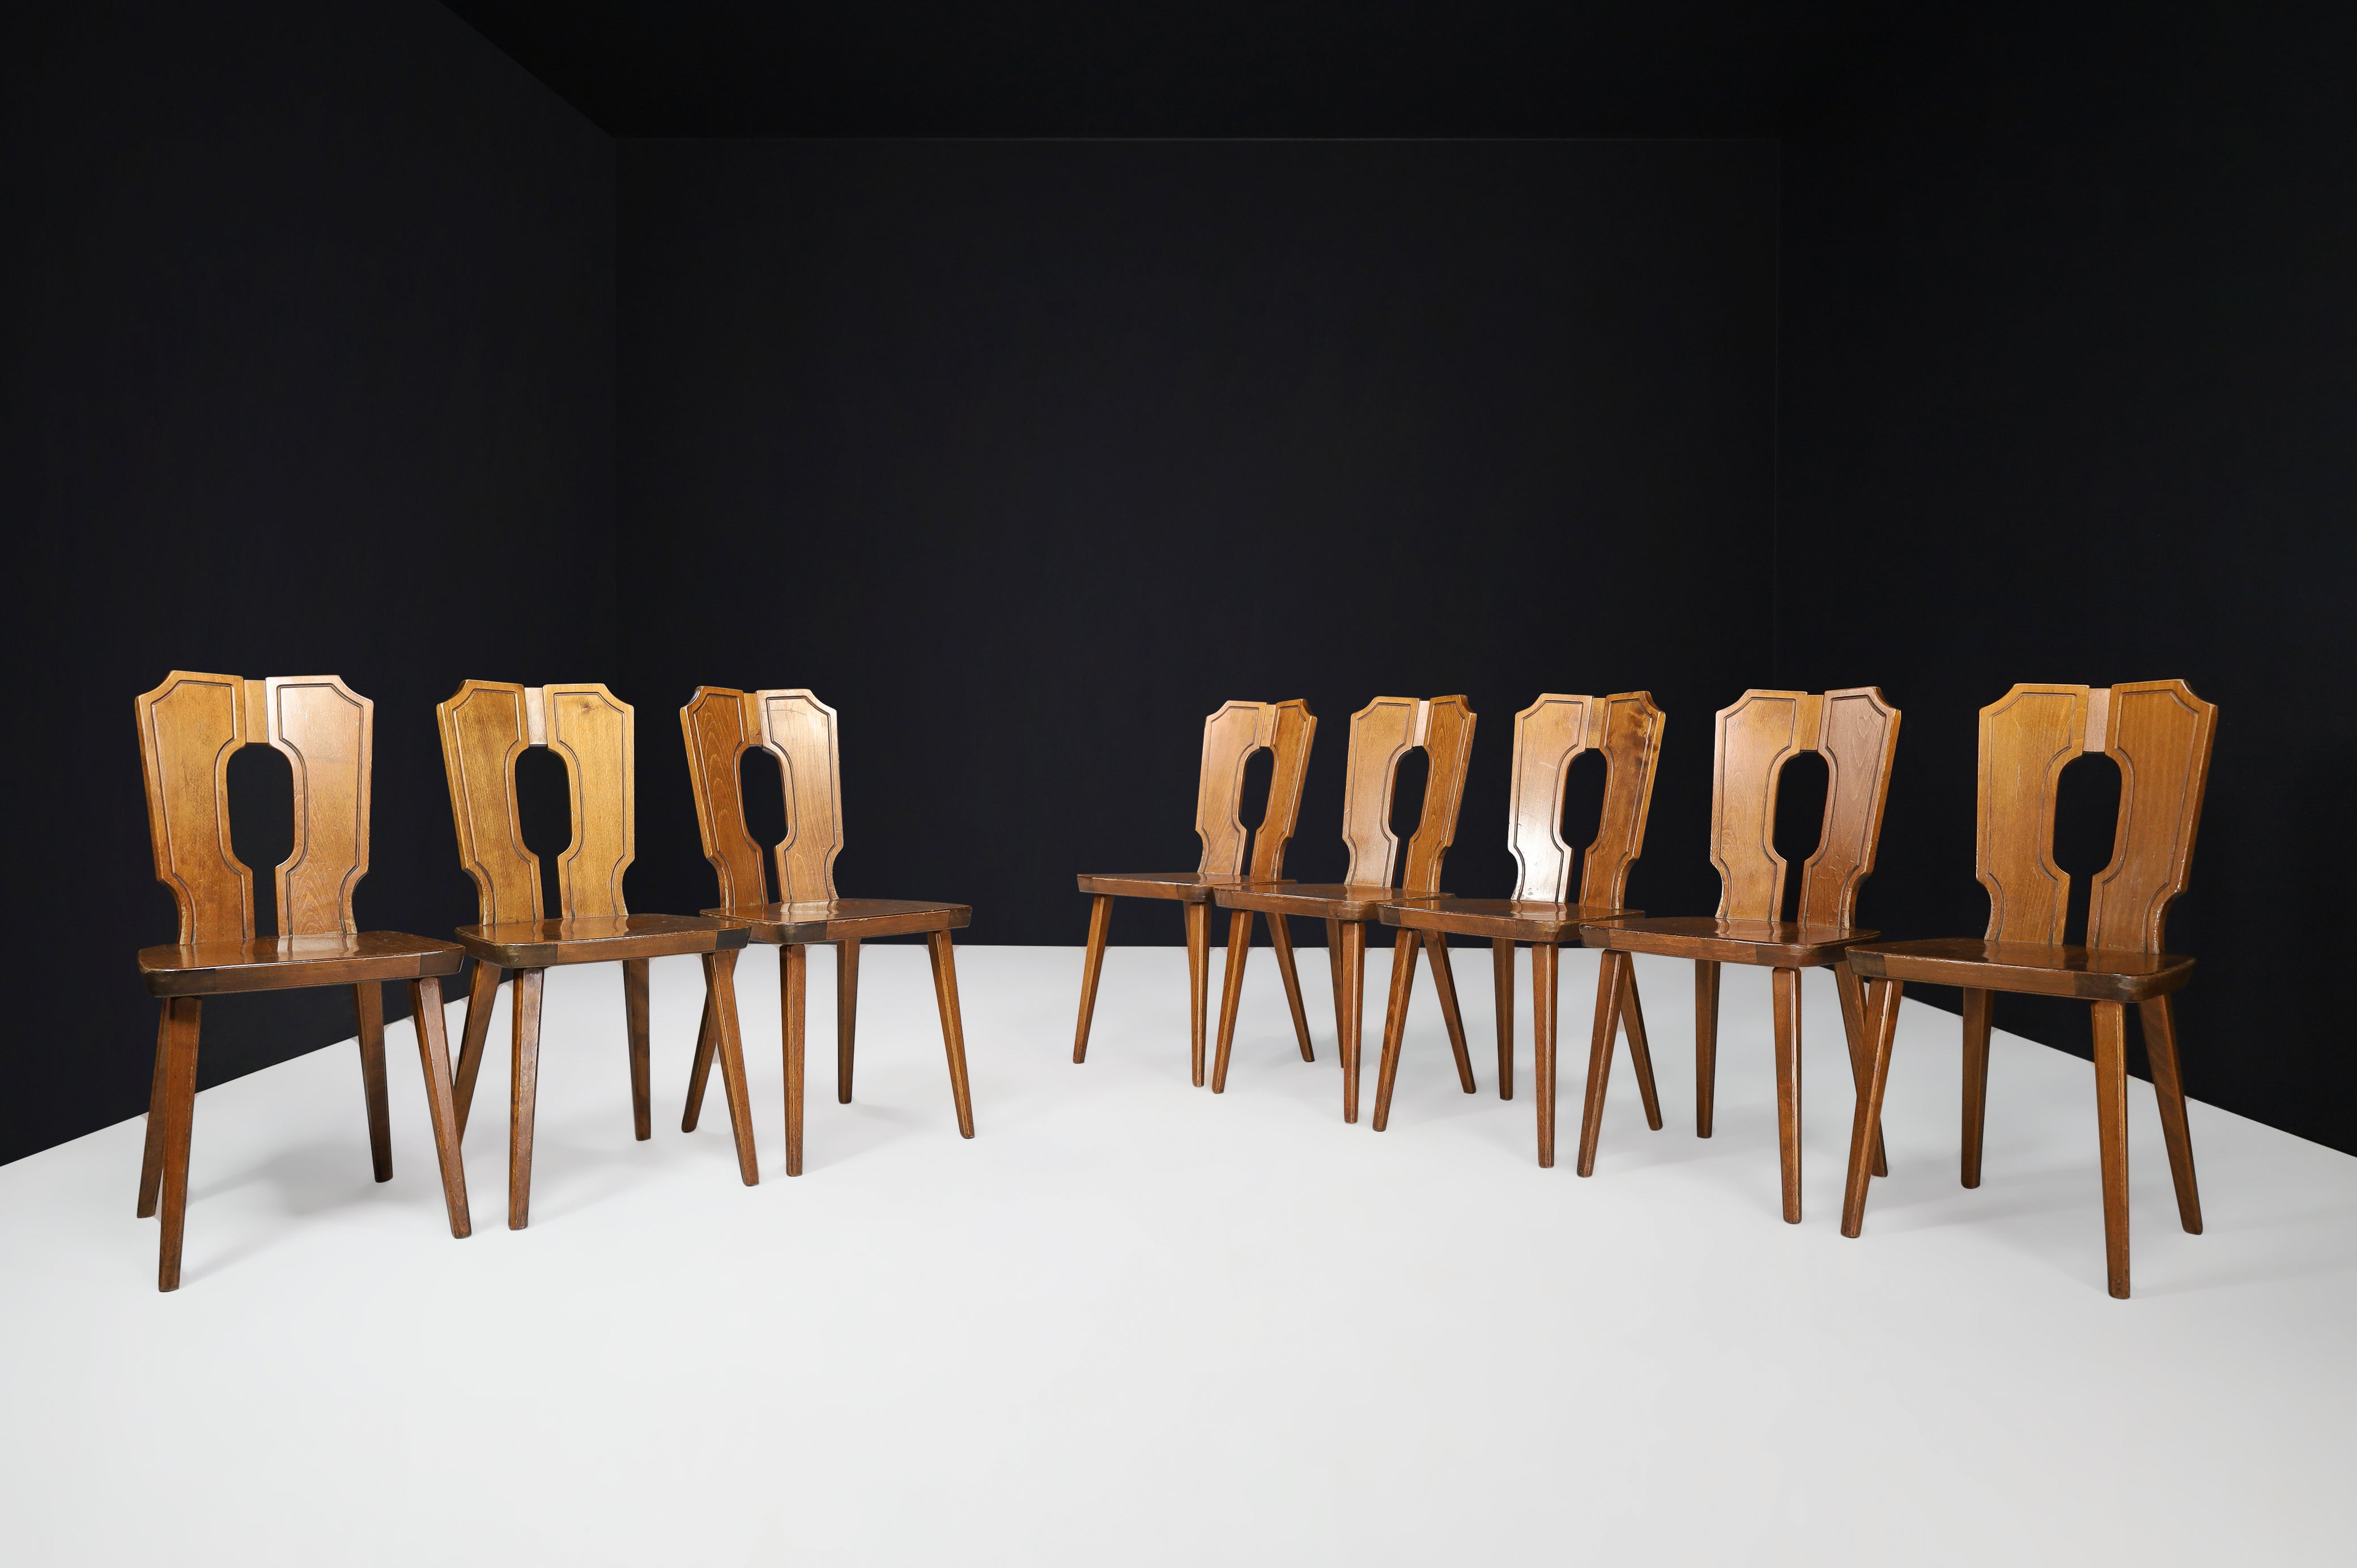 Brutalist stained beech dining chairs, France 1960s

Brutalist, stained beech dining chairs with octagonal tapered legs, curved in the back, France 1960s. These chairs are made entirely of wood. They are in excellent original condition. No defects,